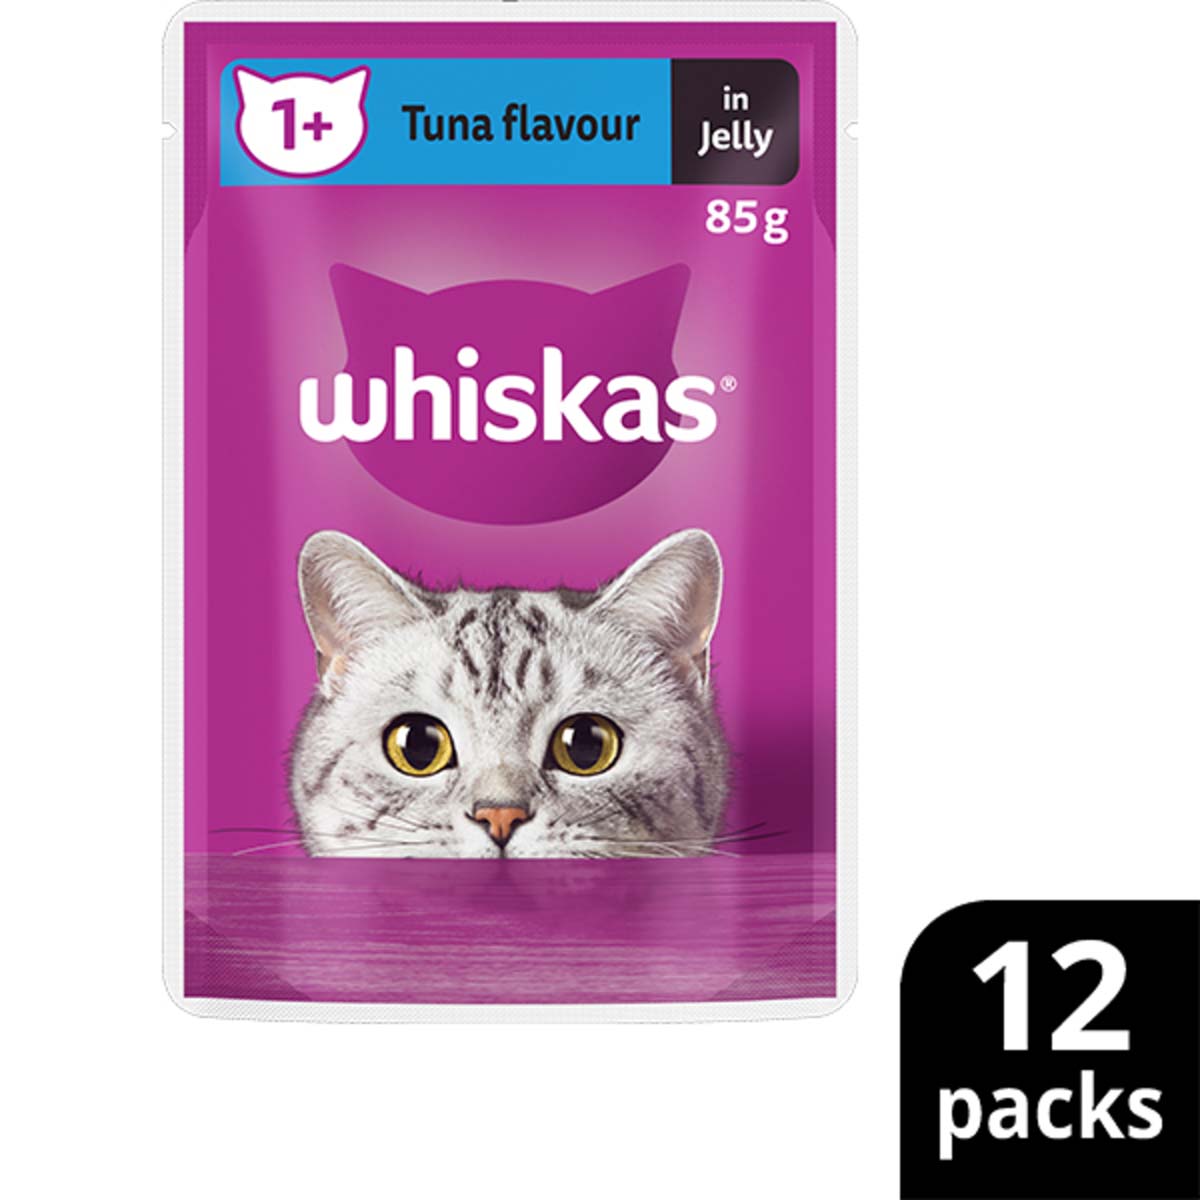 Whiskas Favourites Cat Adt 1+ Tuna Flavour Favourites In Jelly 12x85g